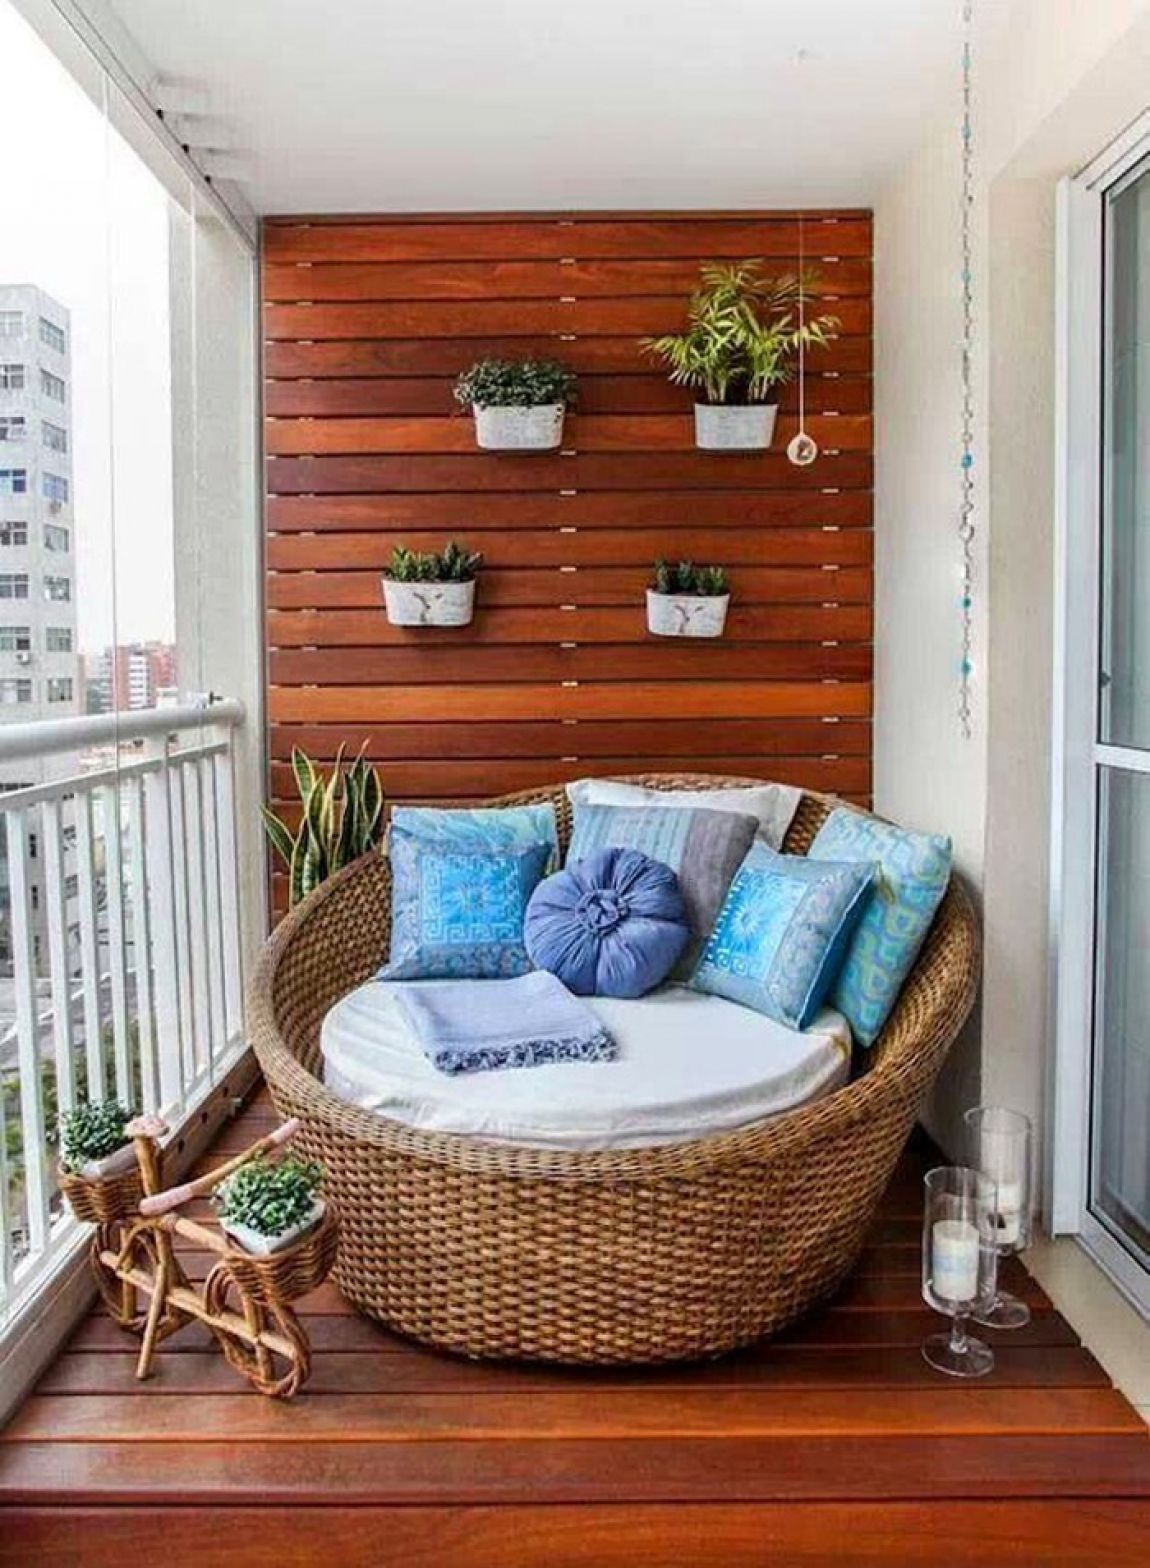 An Outdoor Nook with a View